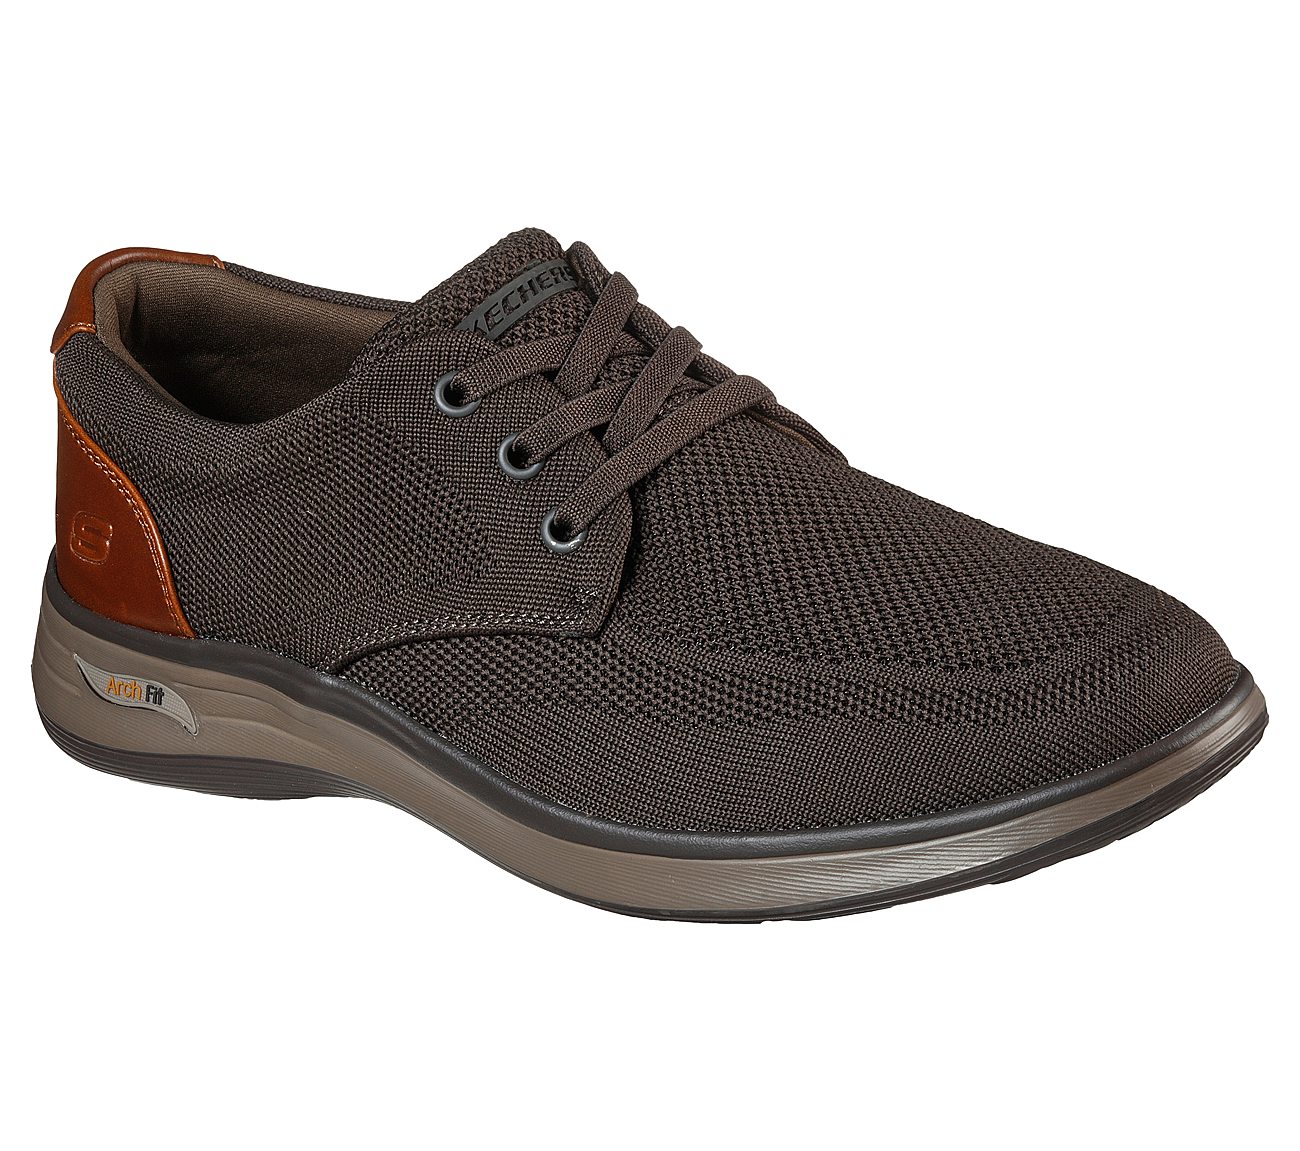 ARCH FIT DARLO - WEEDON, OLIVE/BROWN Footwear Lateral View